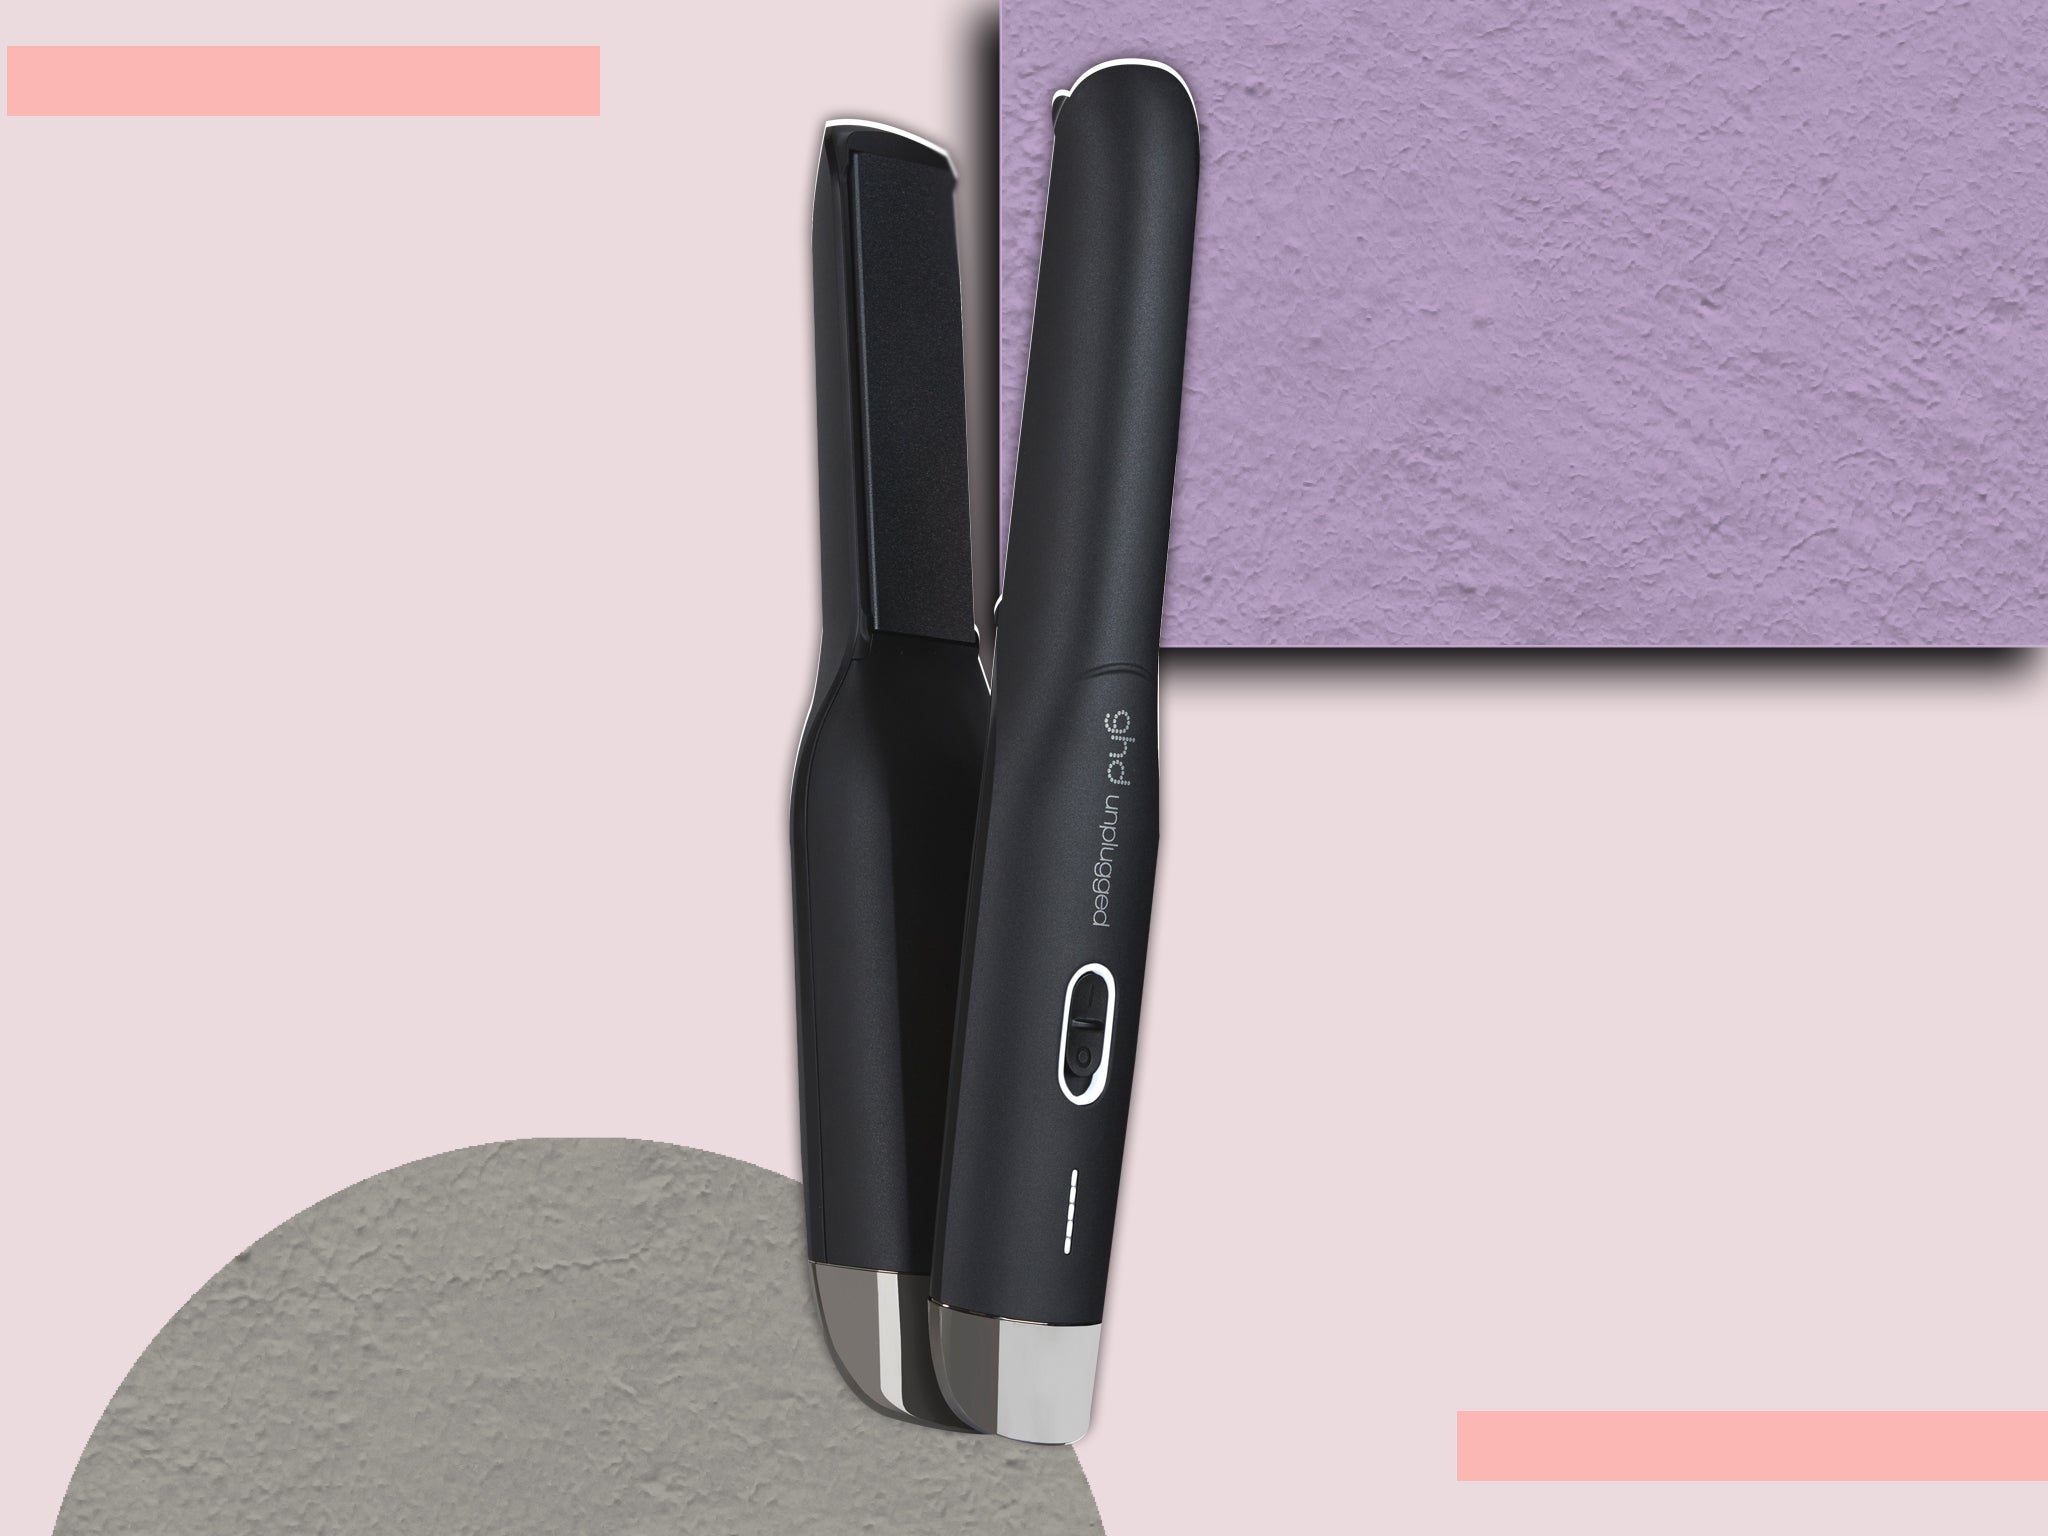 The cordless gadget is the only one of its kind in the ghd line-up